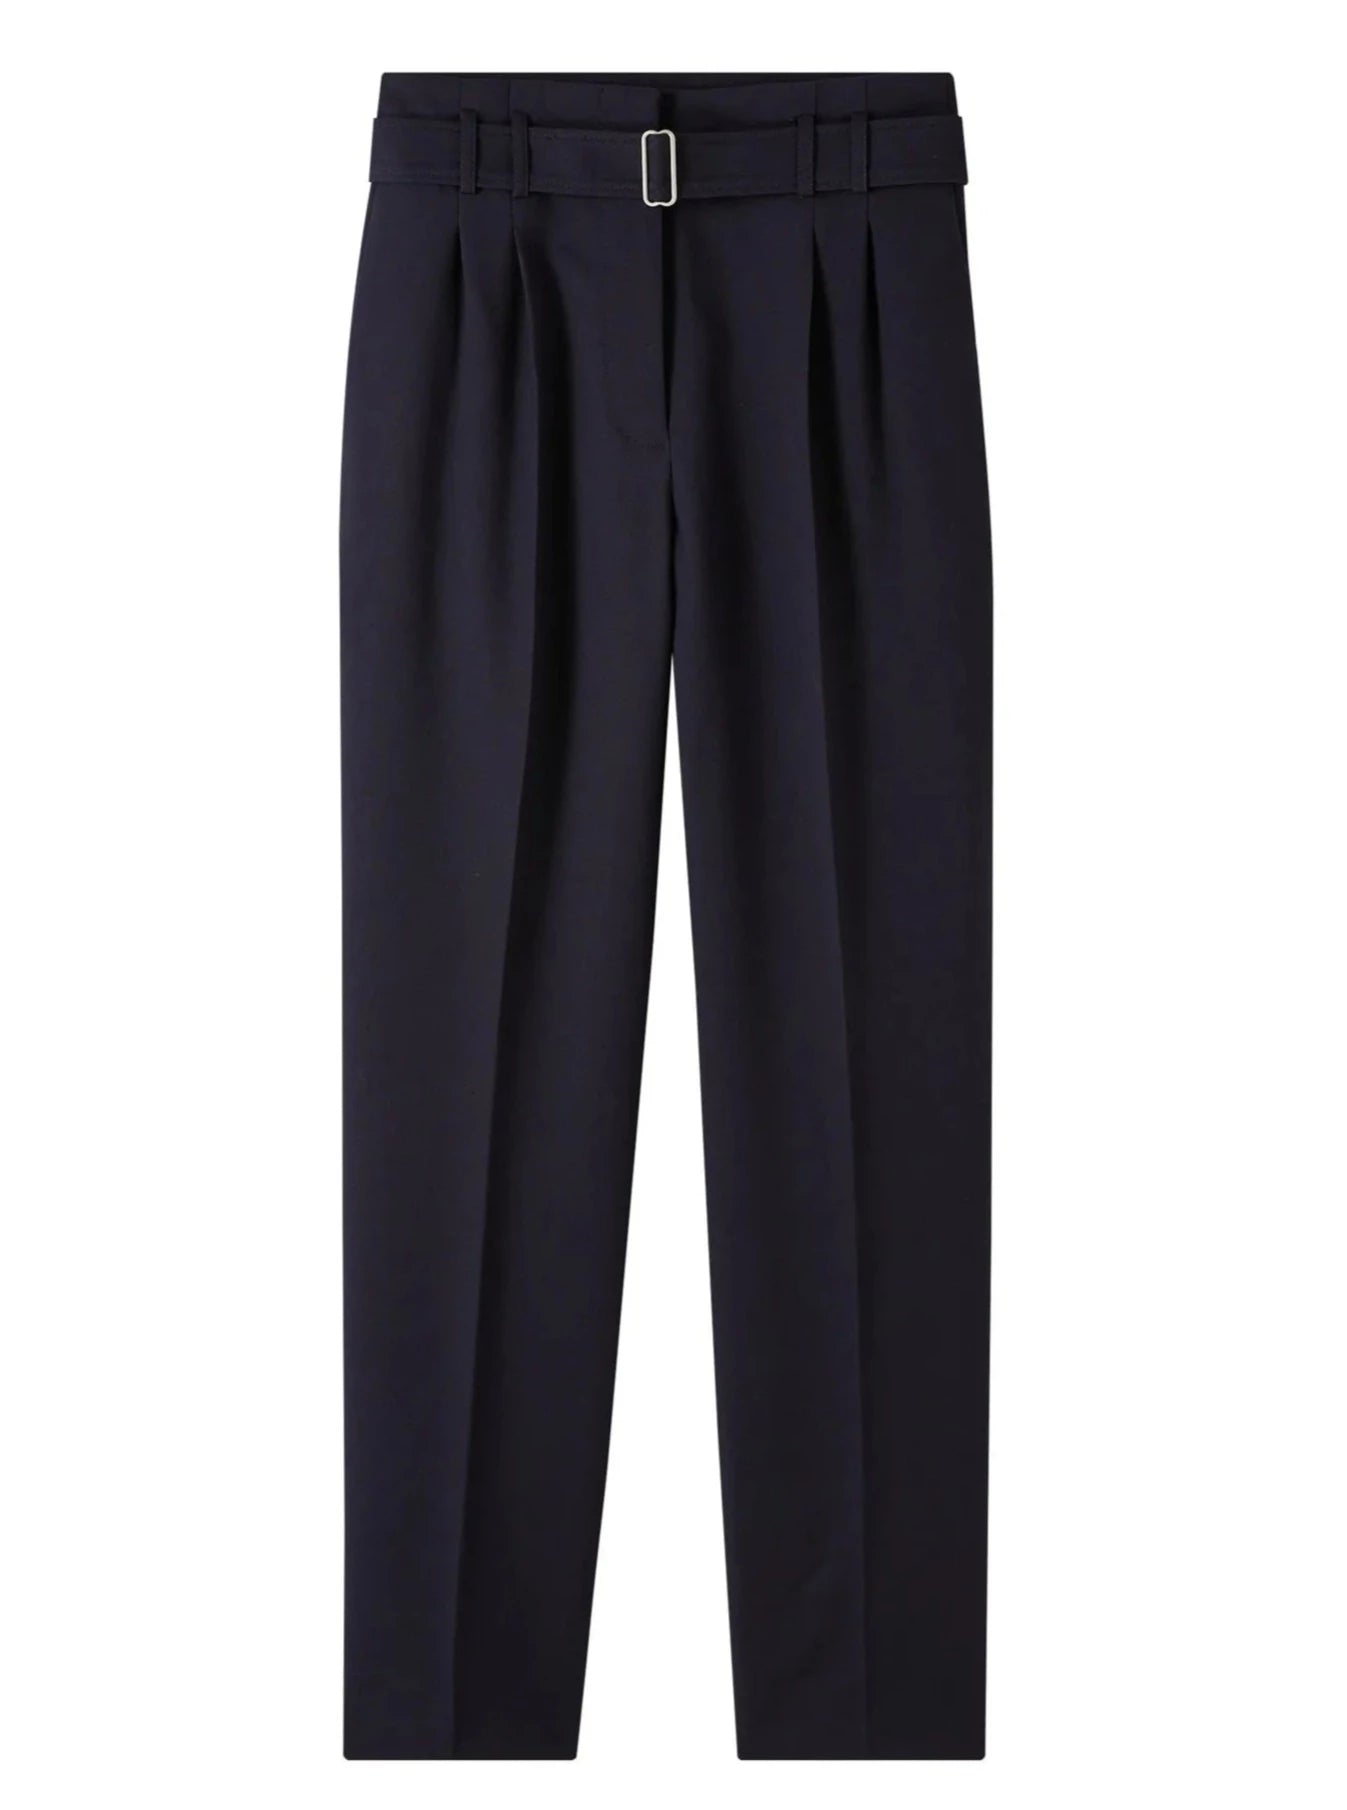 A.P.C. Navy Blue Anthea Trousers